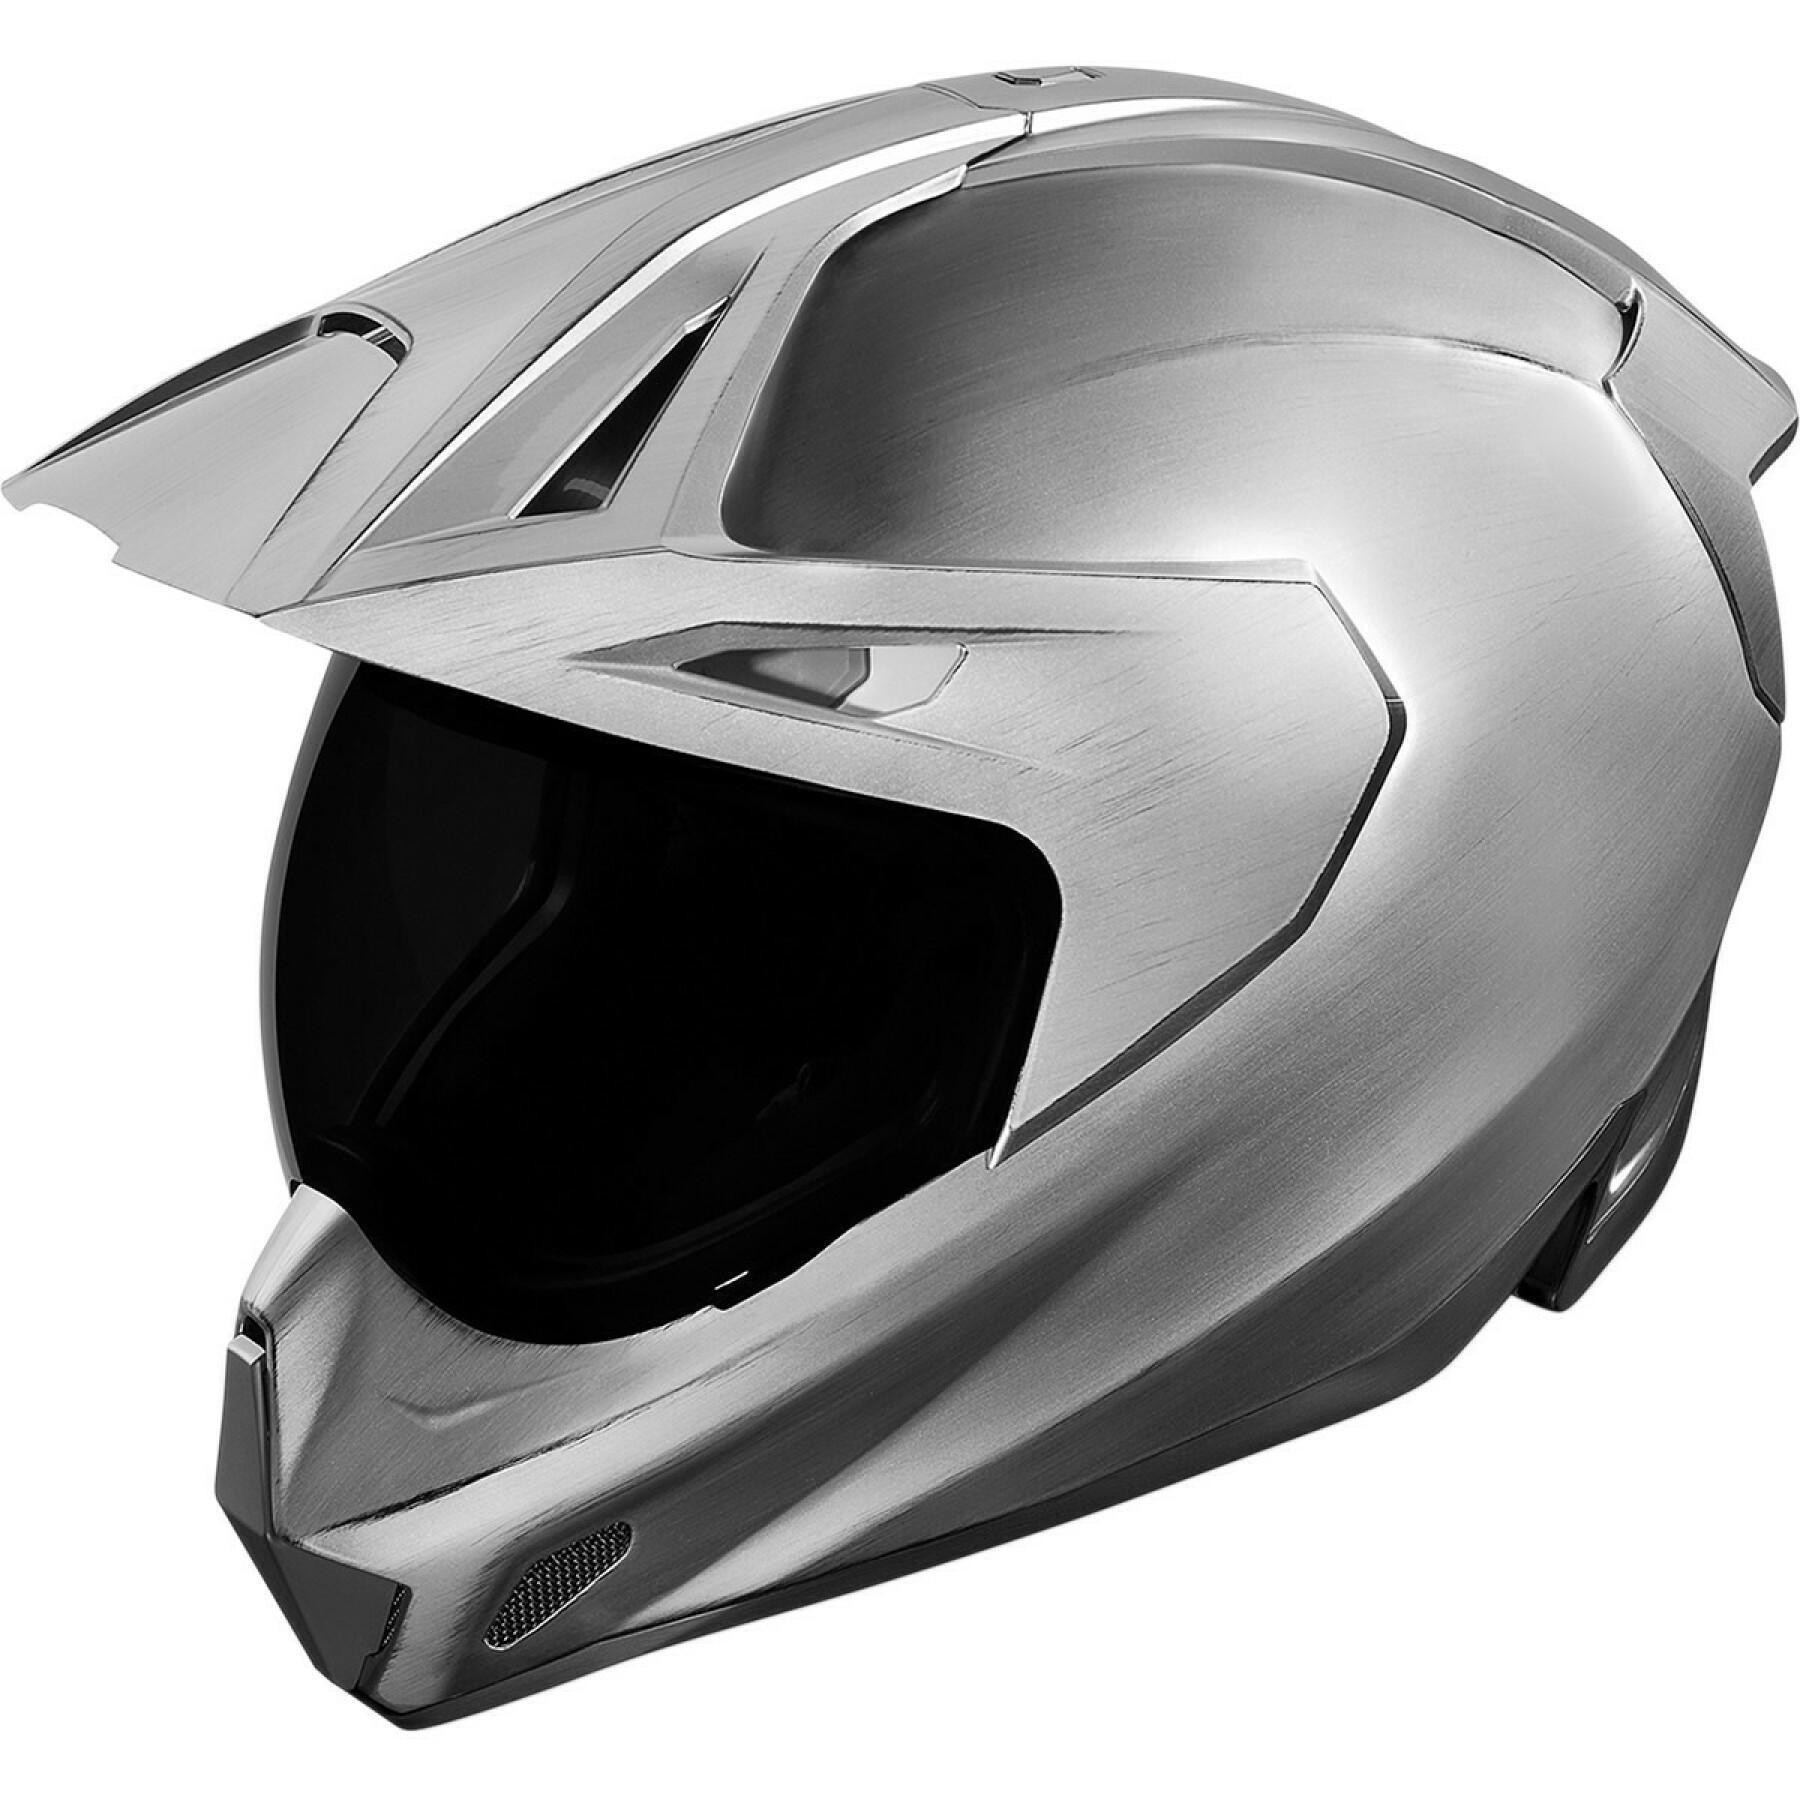 Kask krzyżowy Icon vpro quicksilver